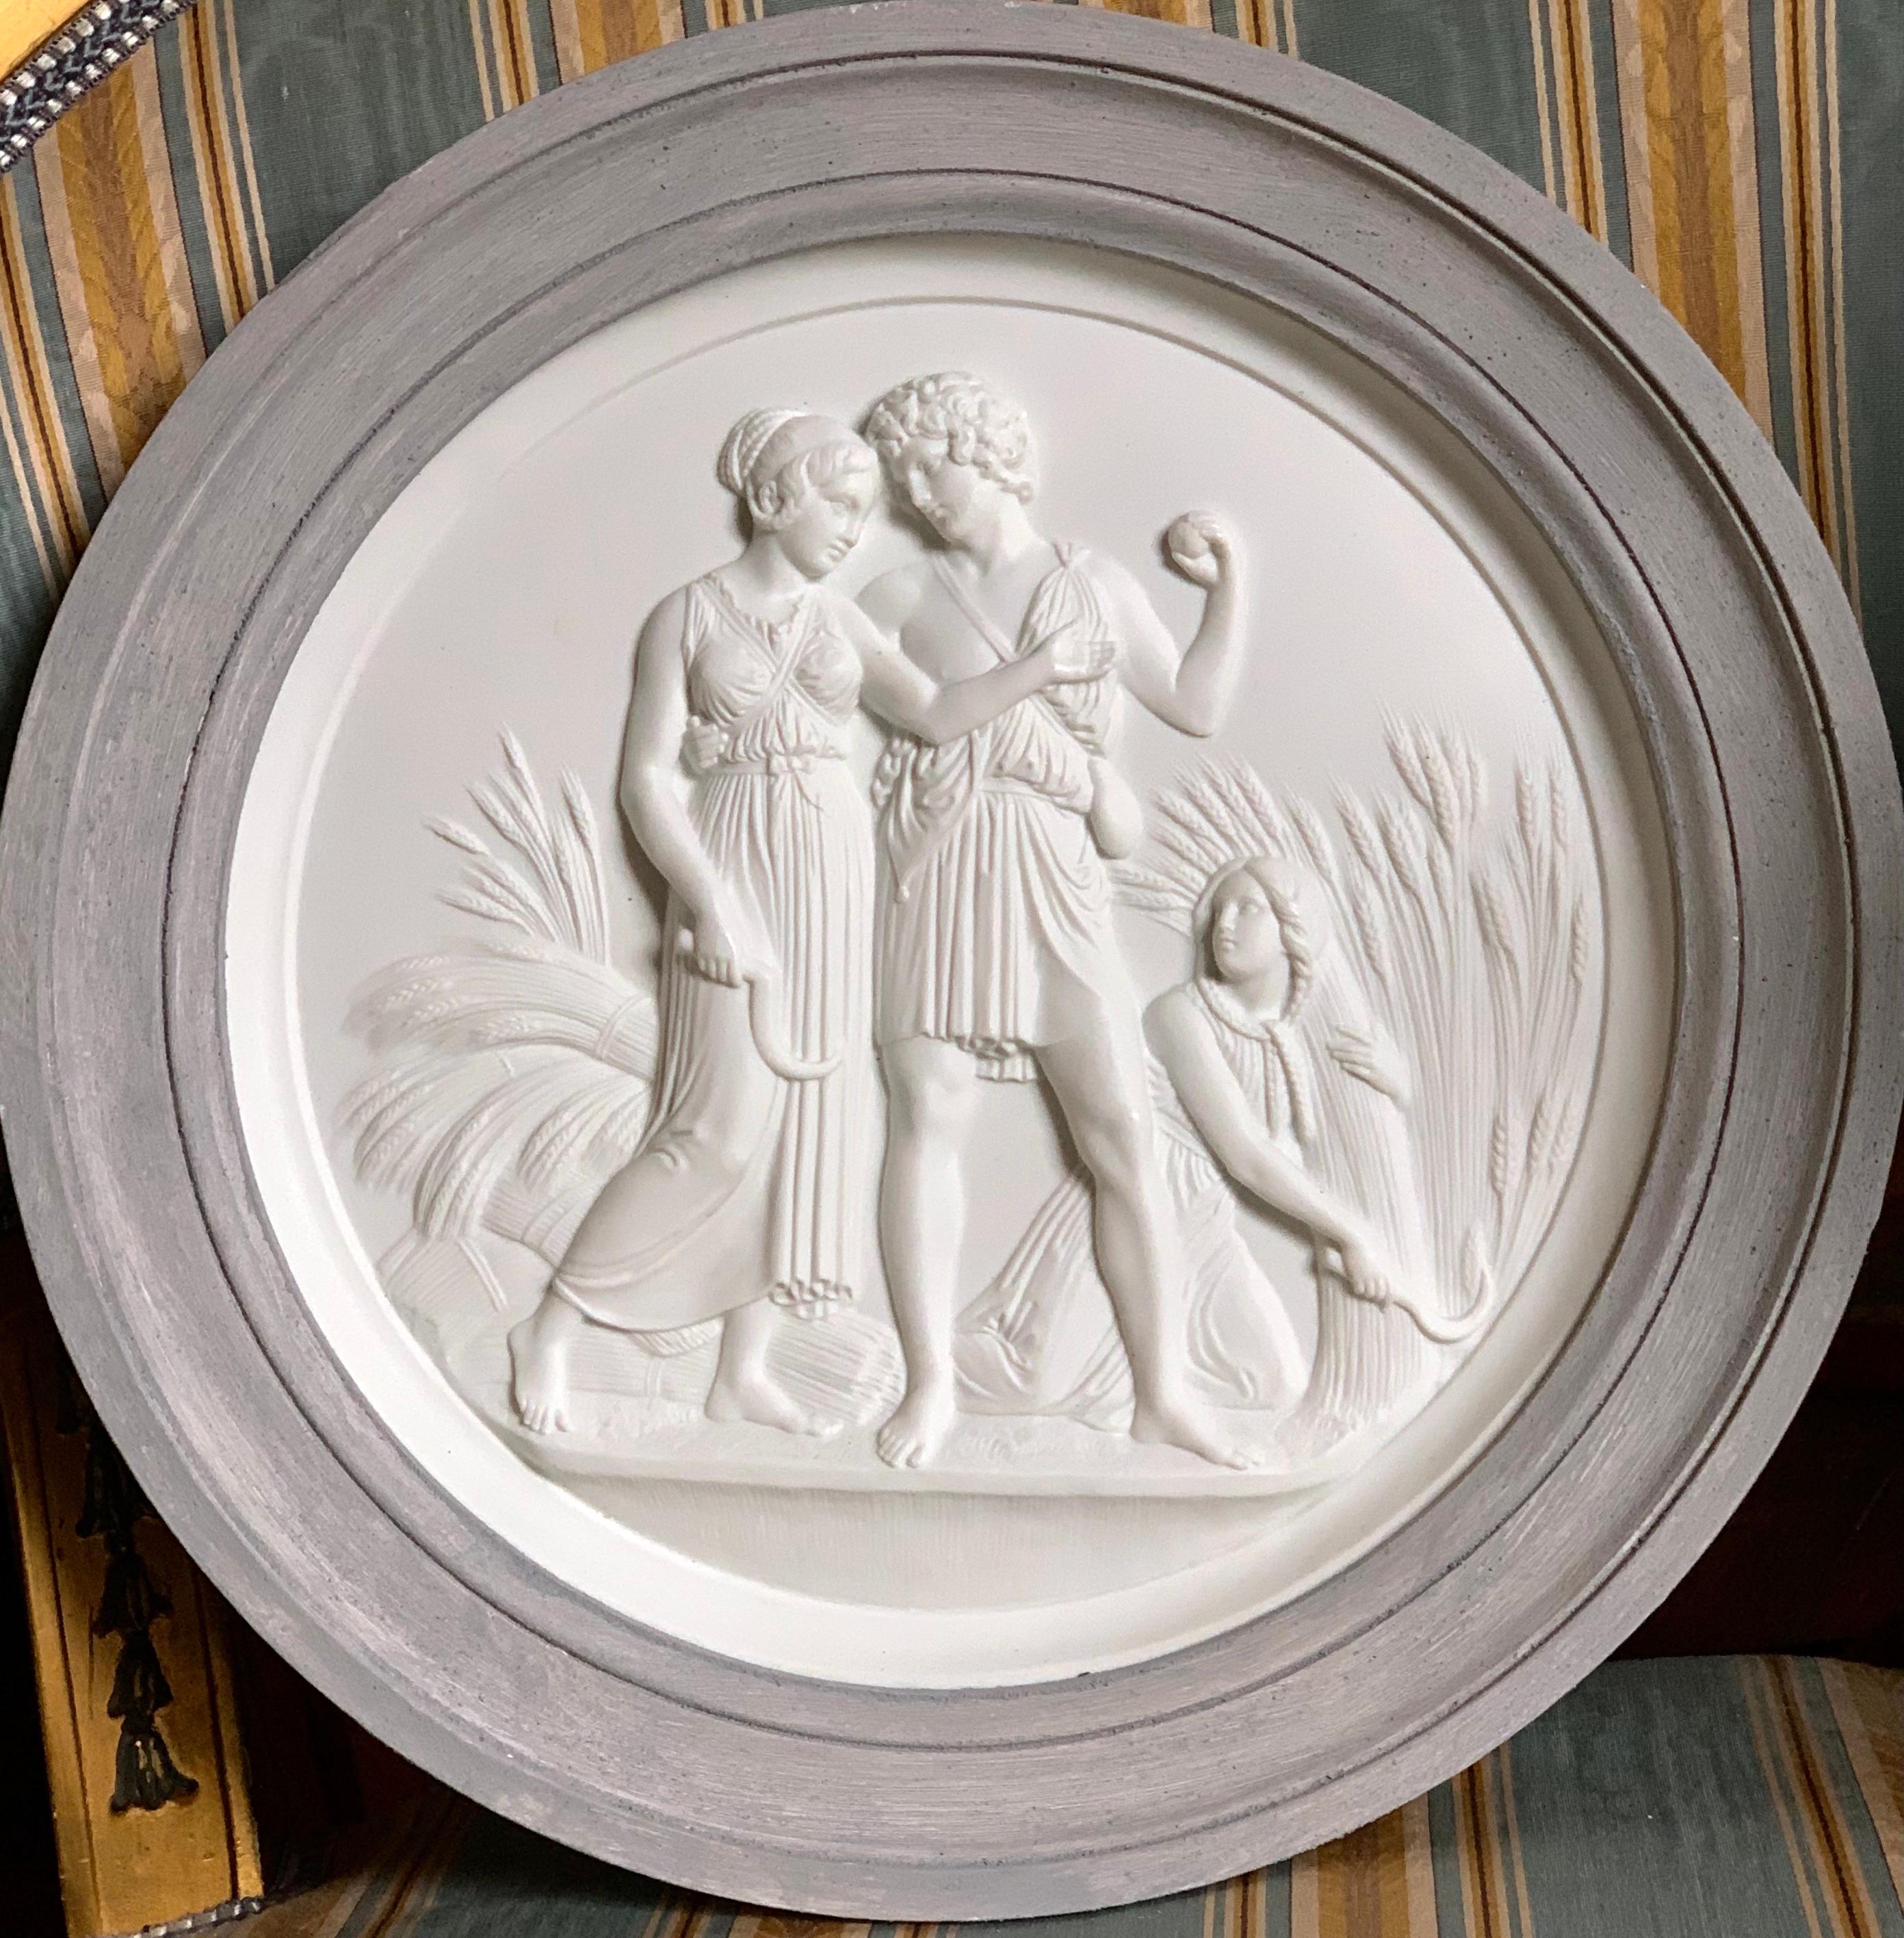 A  rare complete set of  “Four seasons of life”  in Bisque porcelain, in an outstanding diameter 34cm without frame and 46 cm framed. 
After Bertil Thorvaldsen’ marble médaillons carved in Rom in 1836., Few were produced in 1890 by Royal Copenhagen